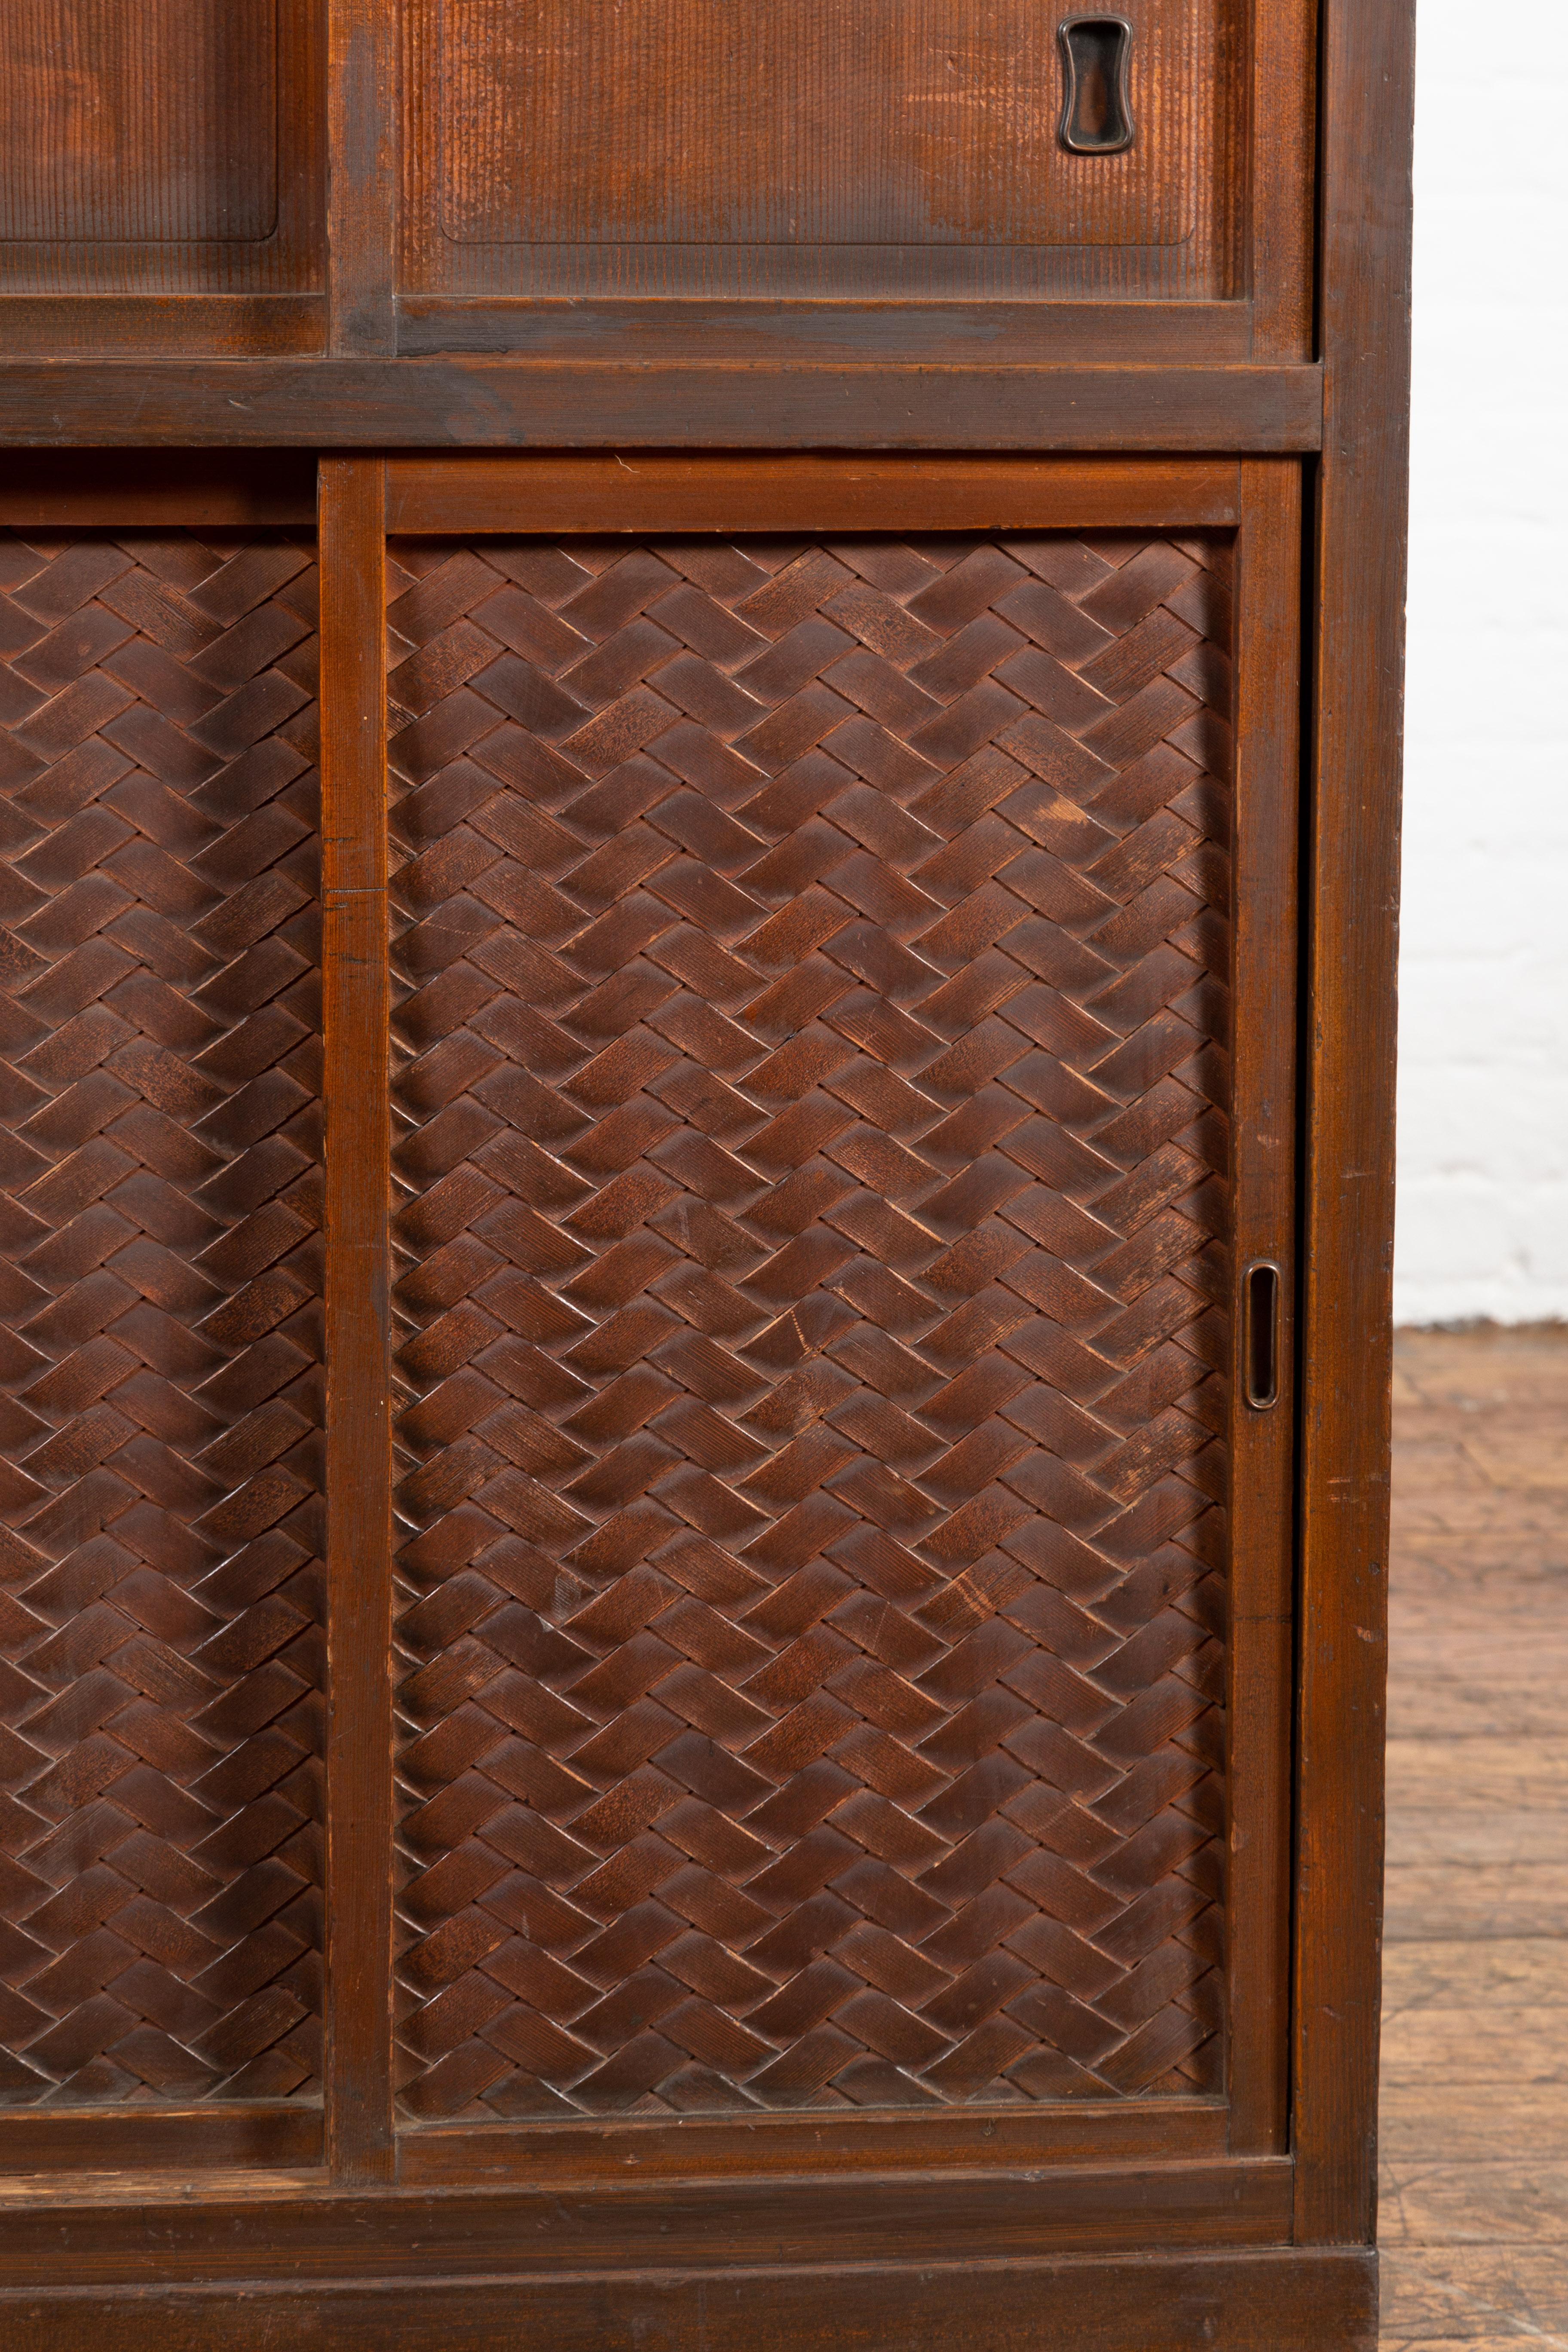 Japanese 19th Century Cabinet with Sliding Doors and Woven Criss-Cross Design 2